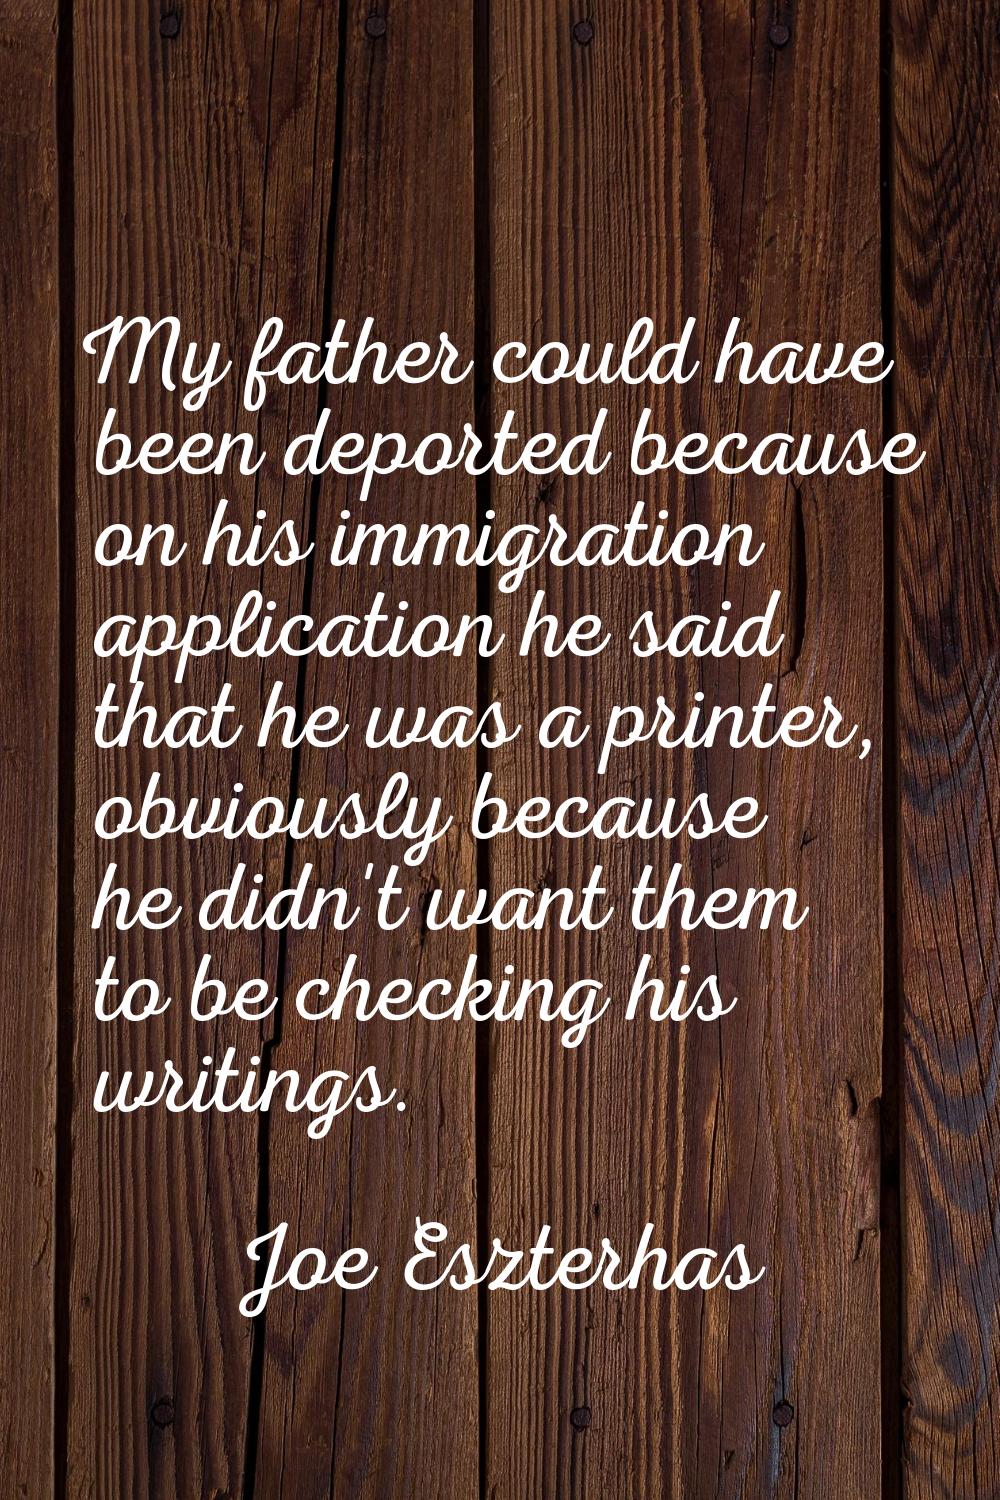 My father could have been deported because on his immigration application he said that he was a pri